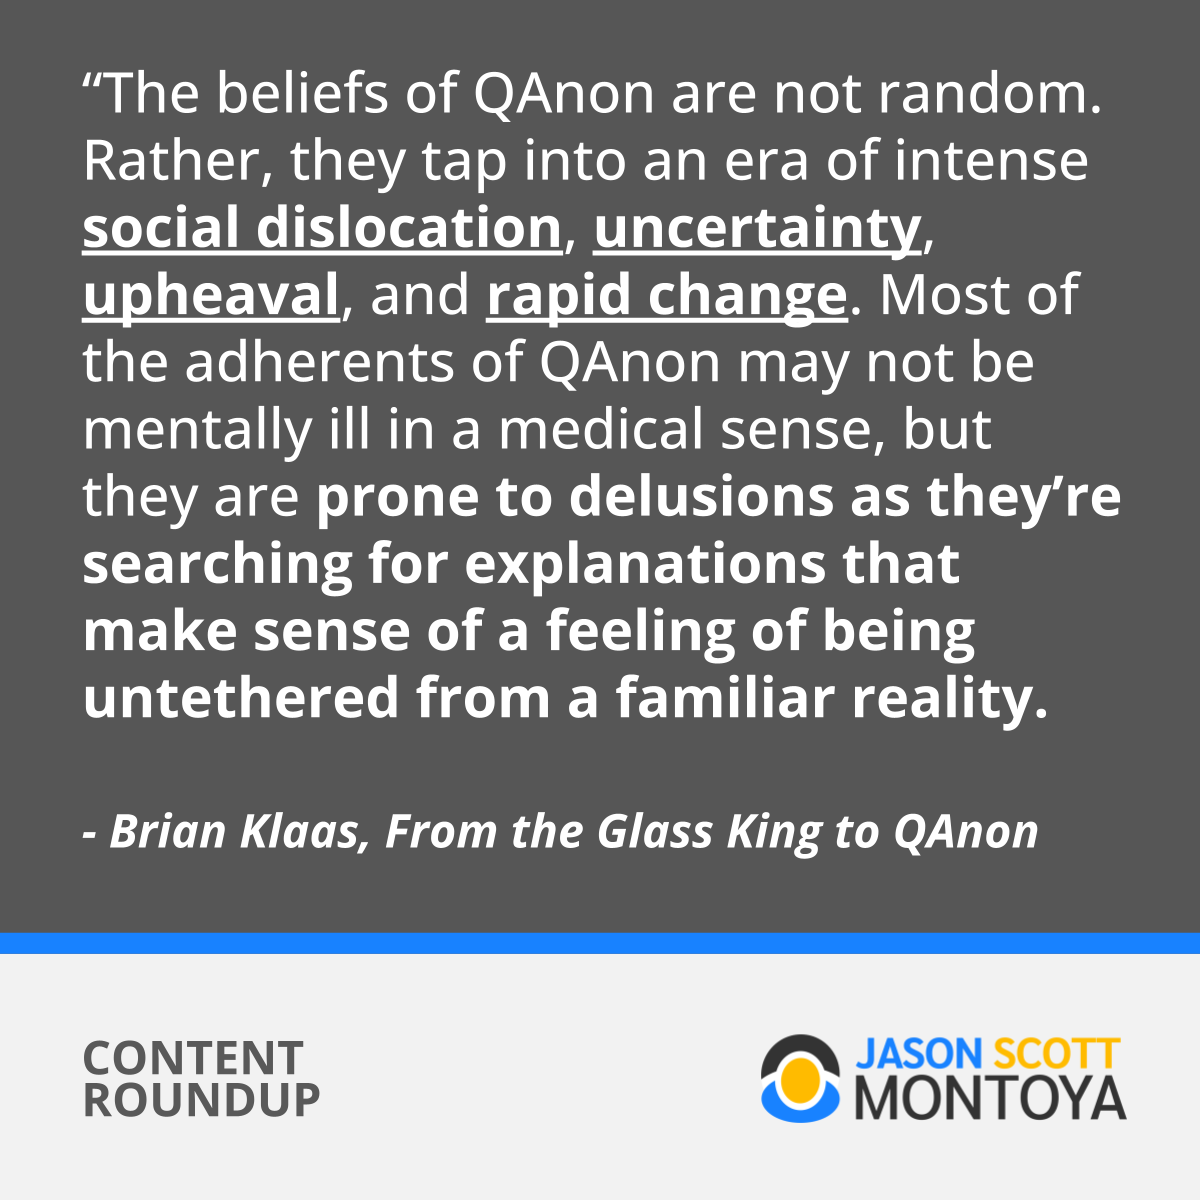 “The beliefs of QAnon are not random. Rather, they tap into an era of intense social dislocation, uncertainty, upheaval, and rapid change. Most of the adherents of QAnon may not be mentally ill in a medical sense, but they are prone to delusions as they’re searching for explanations that make sense of a feeling of being untethered from a familiar reality.  - Brian Klaas, From the Glass King to QAnon